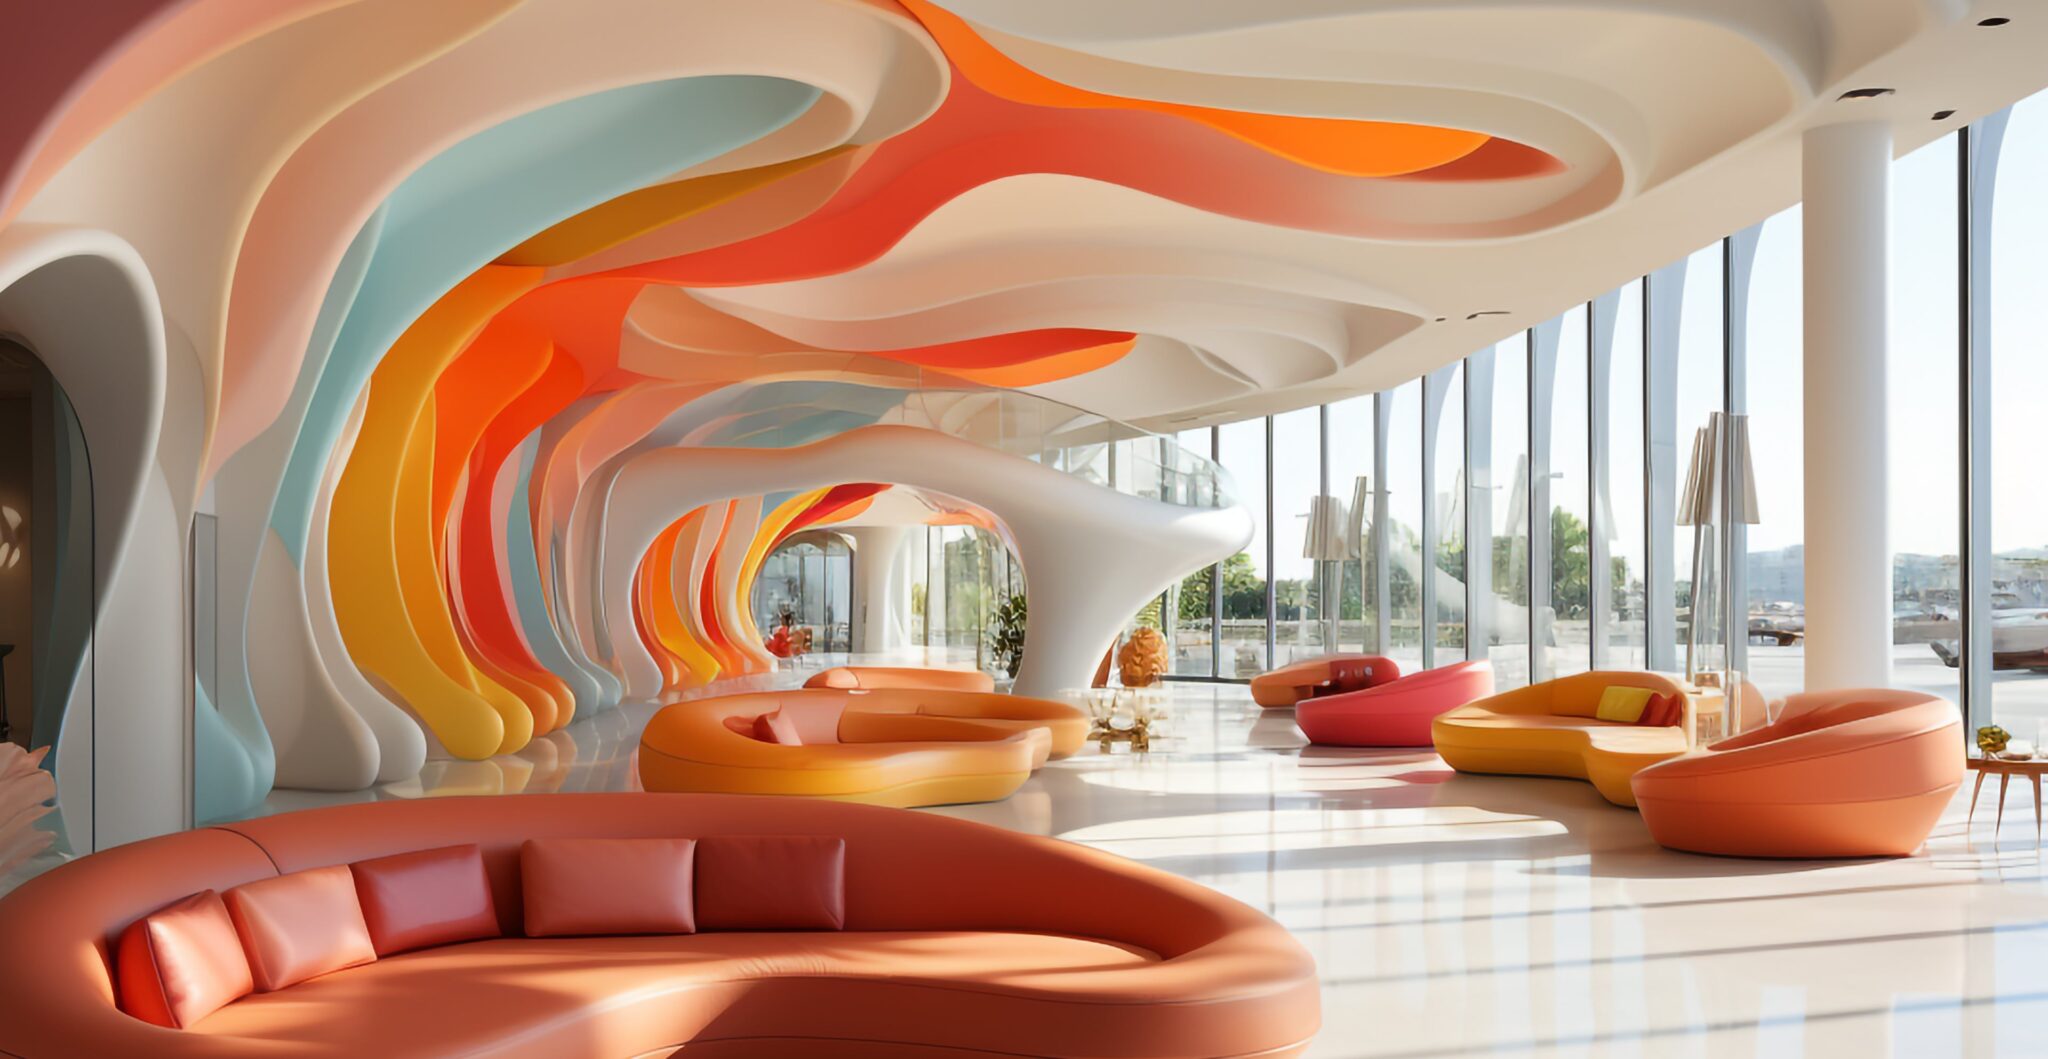 A vibrant lobby adorned with furniture in shades of orange, blue, and yellow.